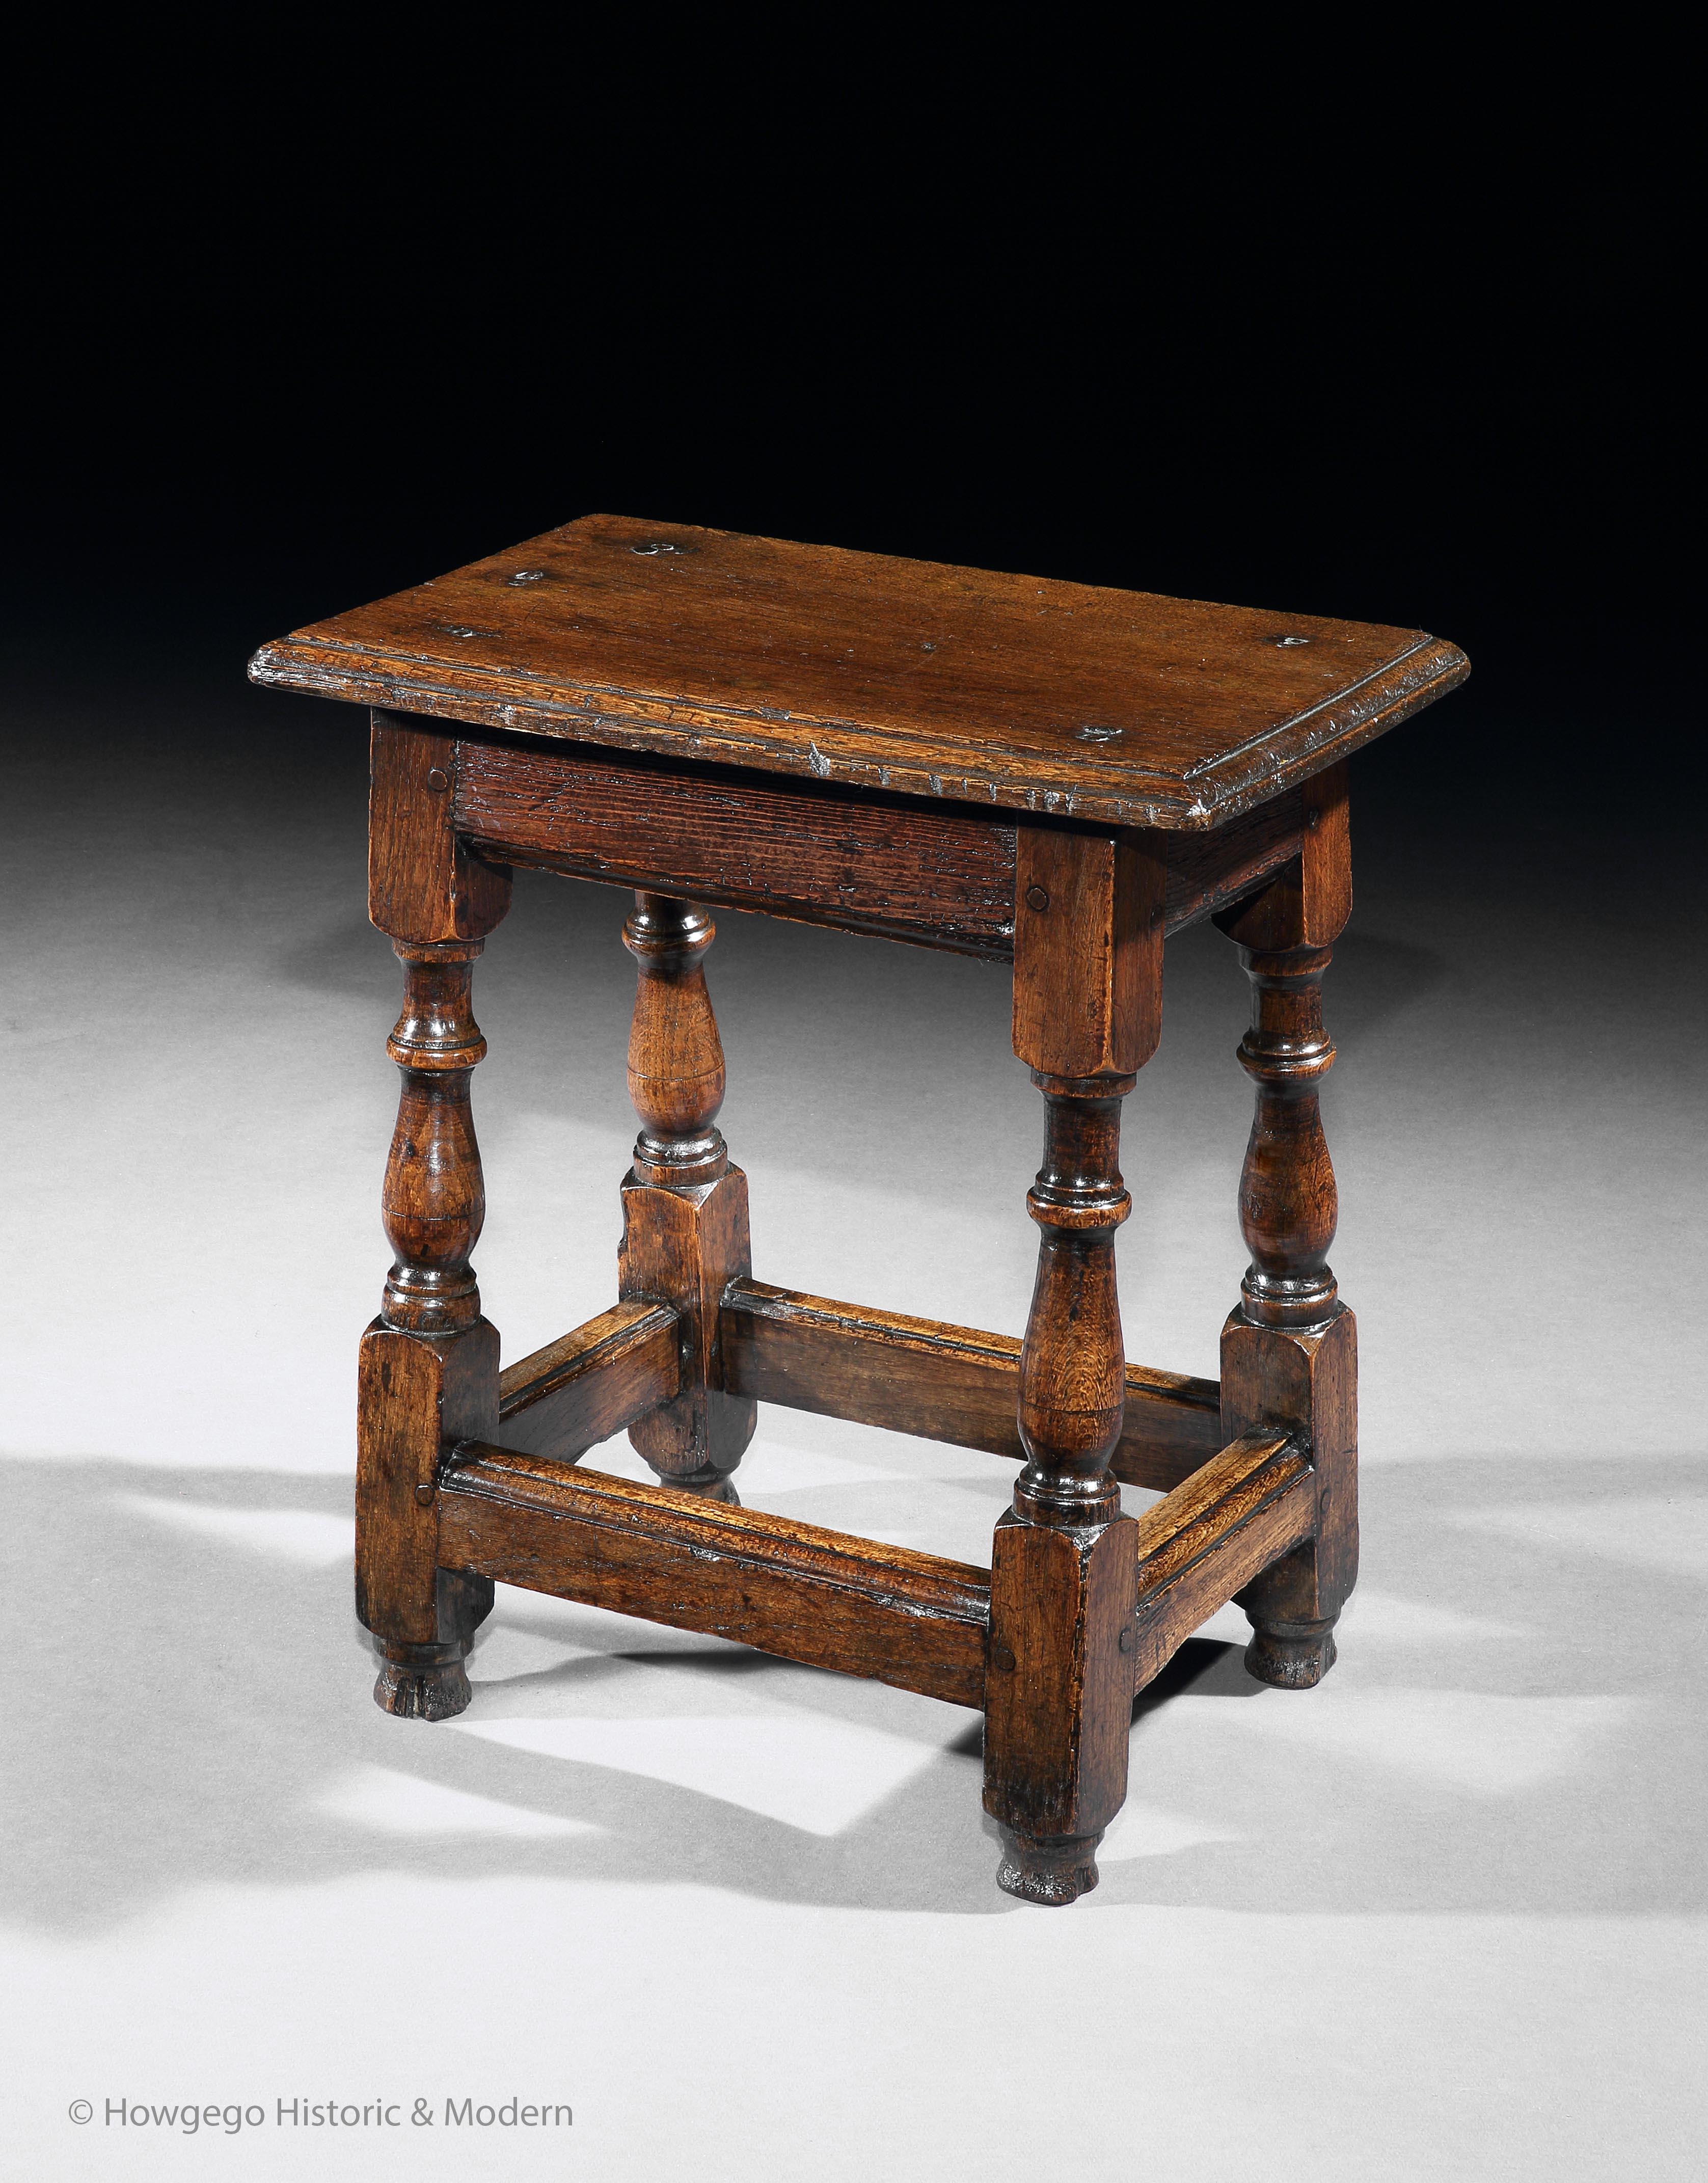 Characterful, naive charm
Perfect height for occassional table beside armchair or sofa for a drink and nibbles

A mid-17th century oak joint stool. The plank top with a moulded edge. Two sets of metal nails and another set of screws show where it